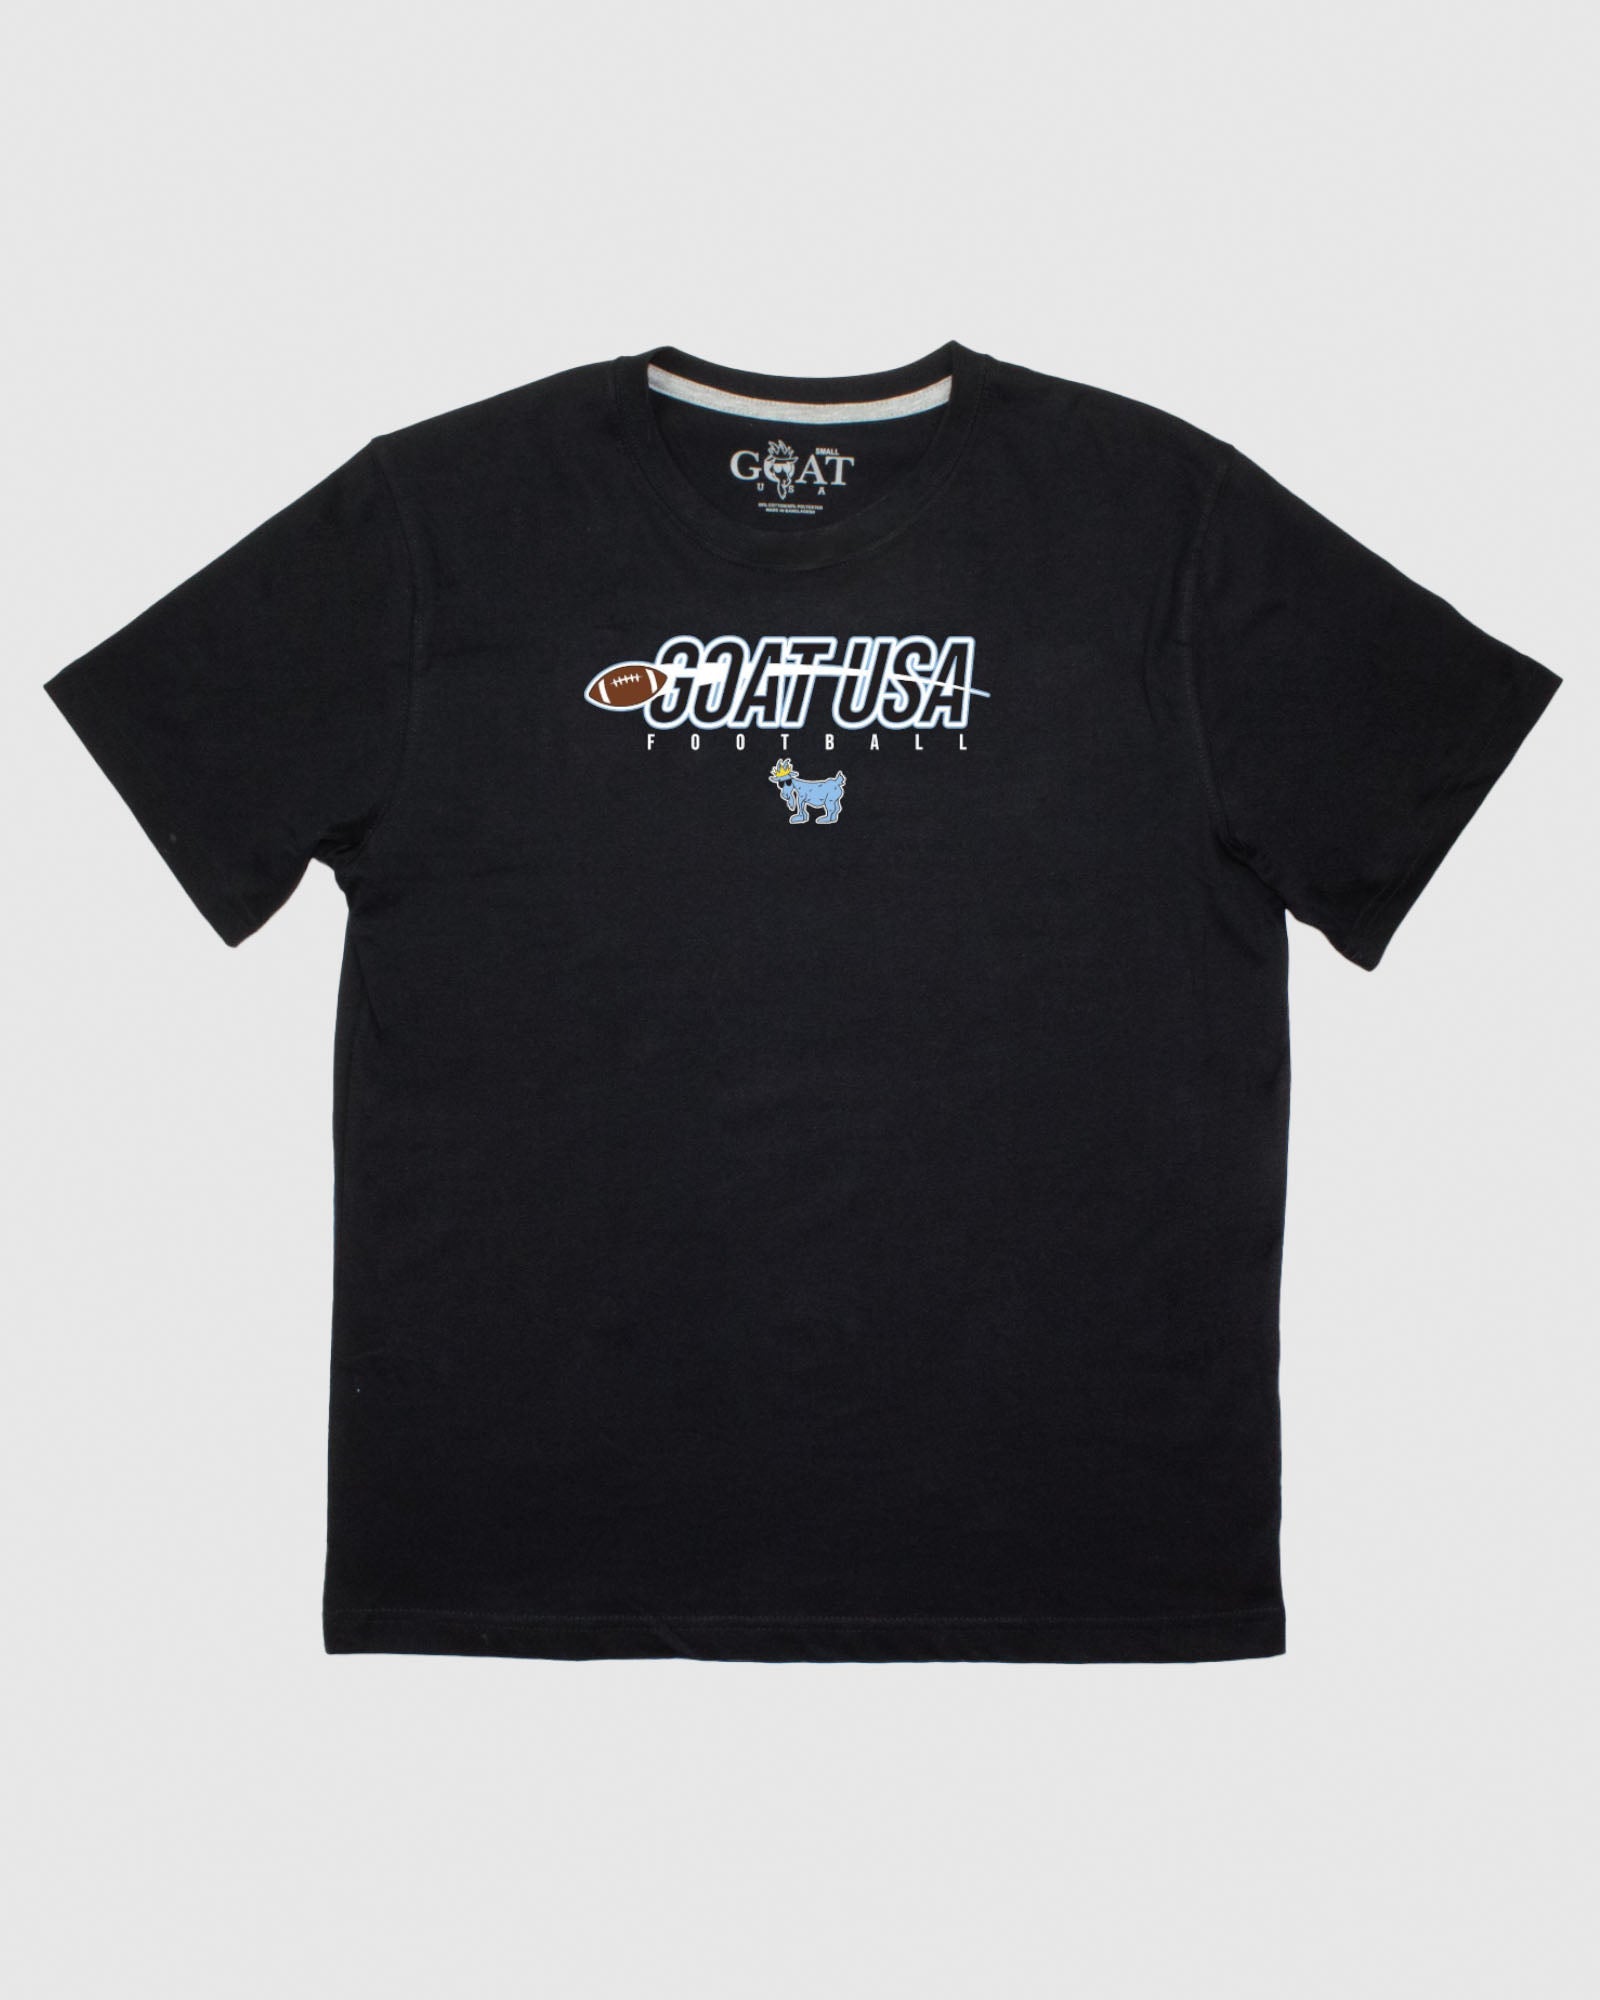 Goat USA Youth Showtime Football T-Shirt